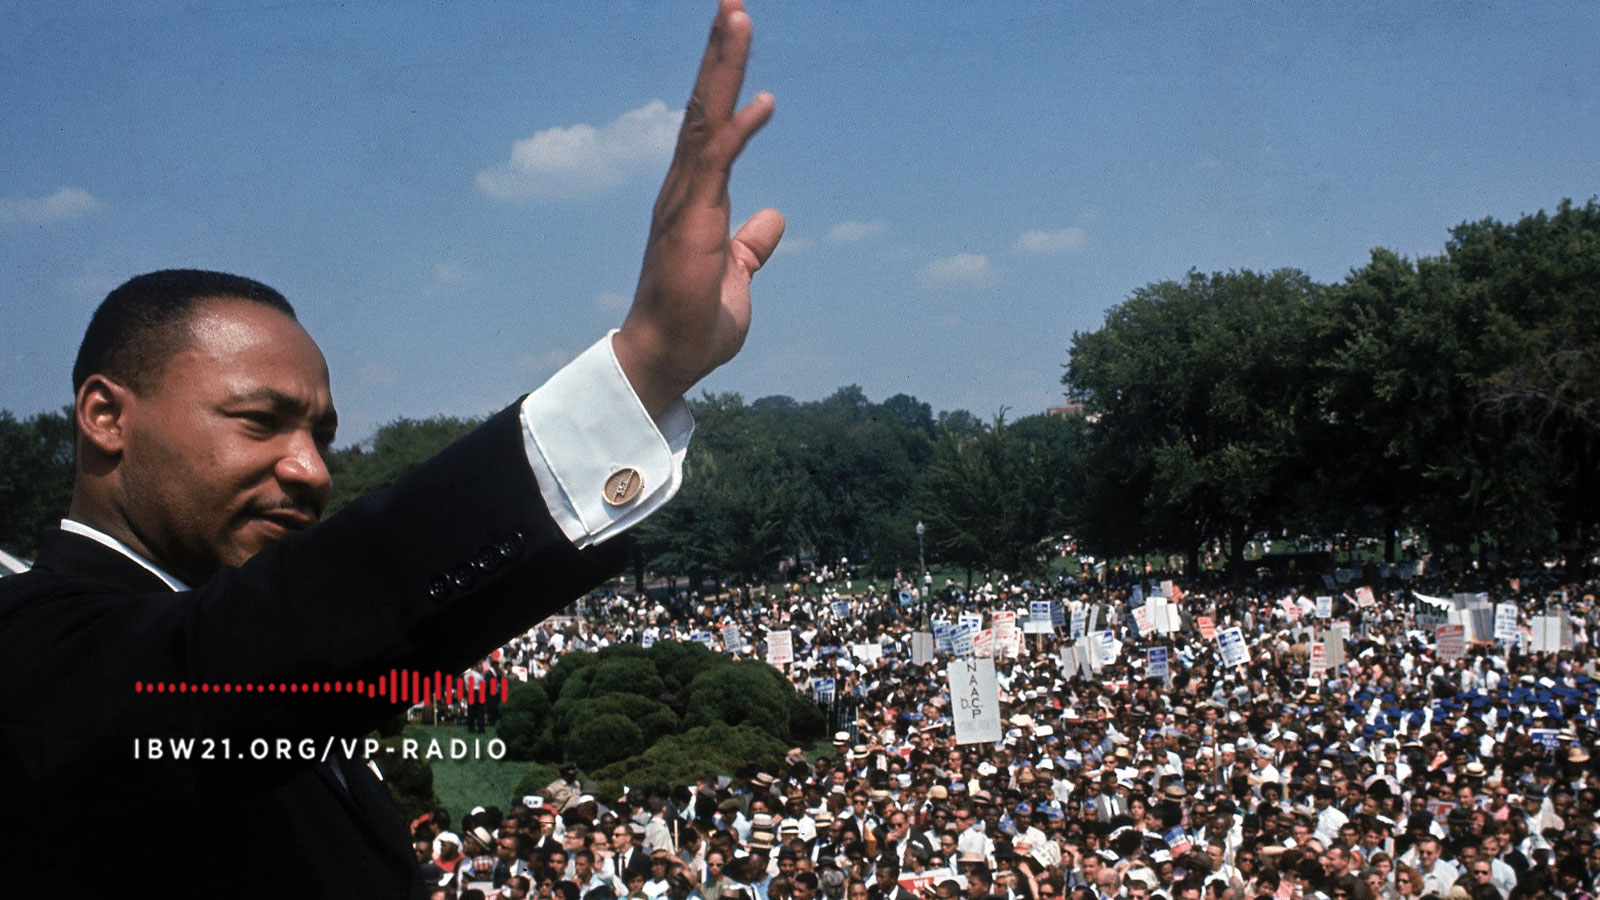 Vantage Point: The 60th Anniversary of the March on Washington – Dr. Martin Luther King, the Dream and the Promissory Note